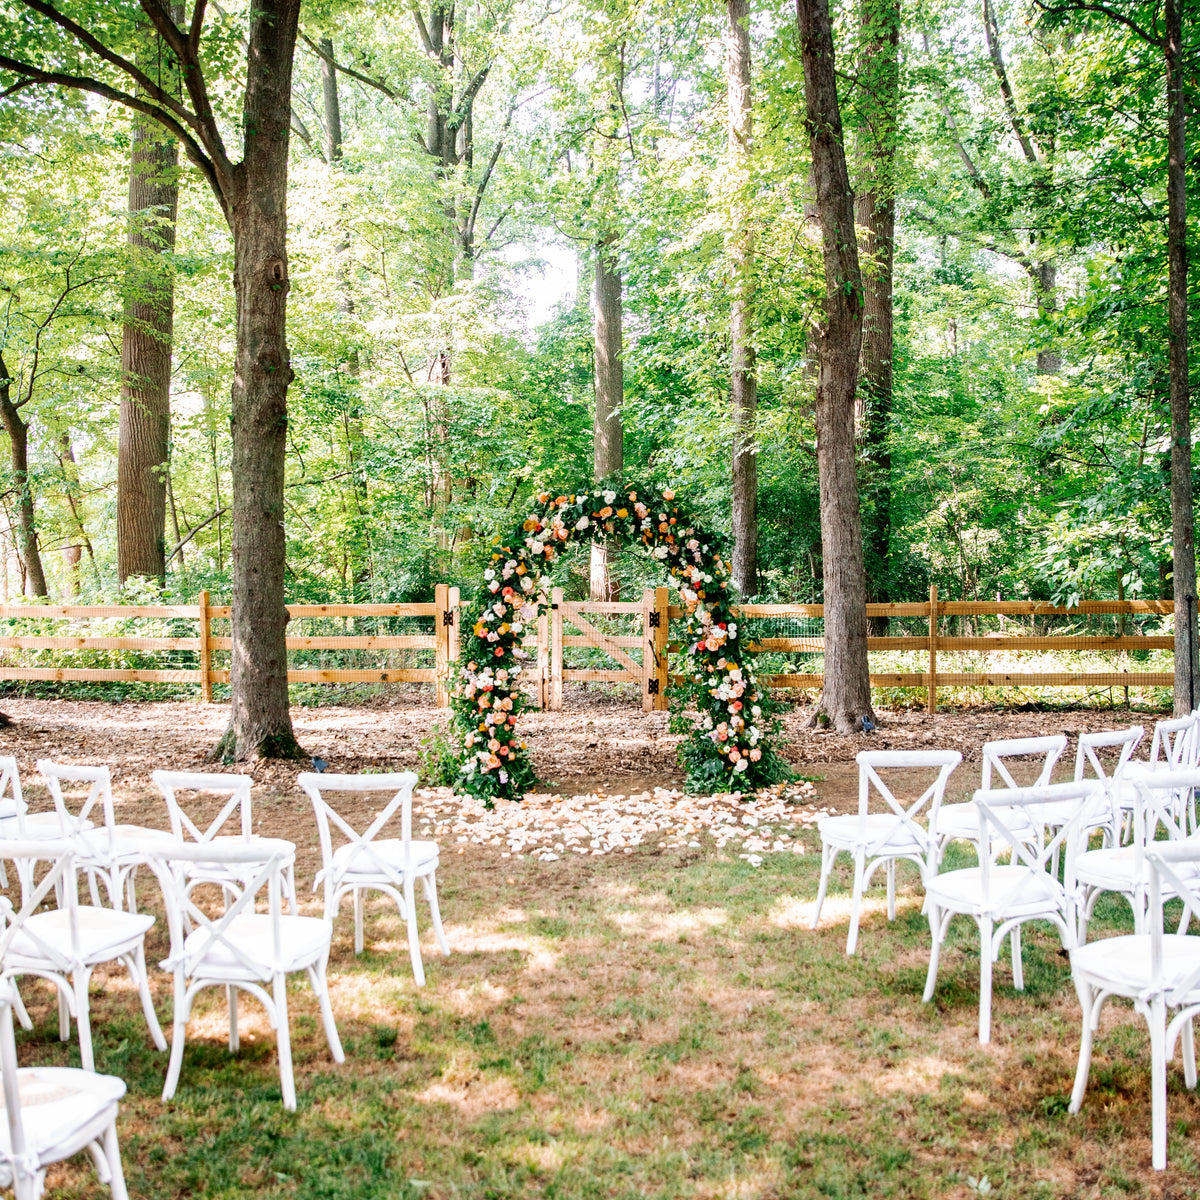 What You Need to Know When Planning a Backyard Wedding